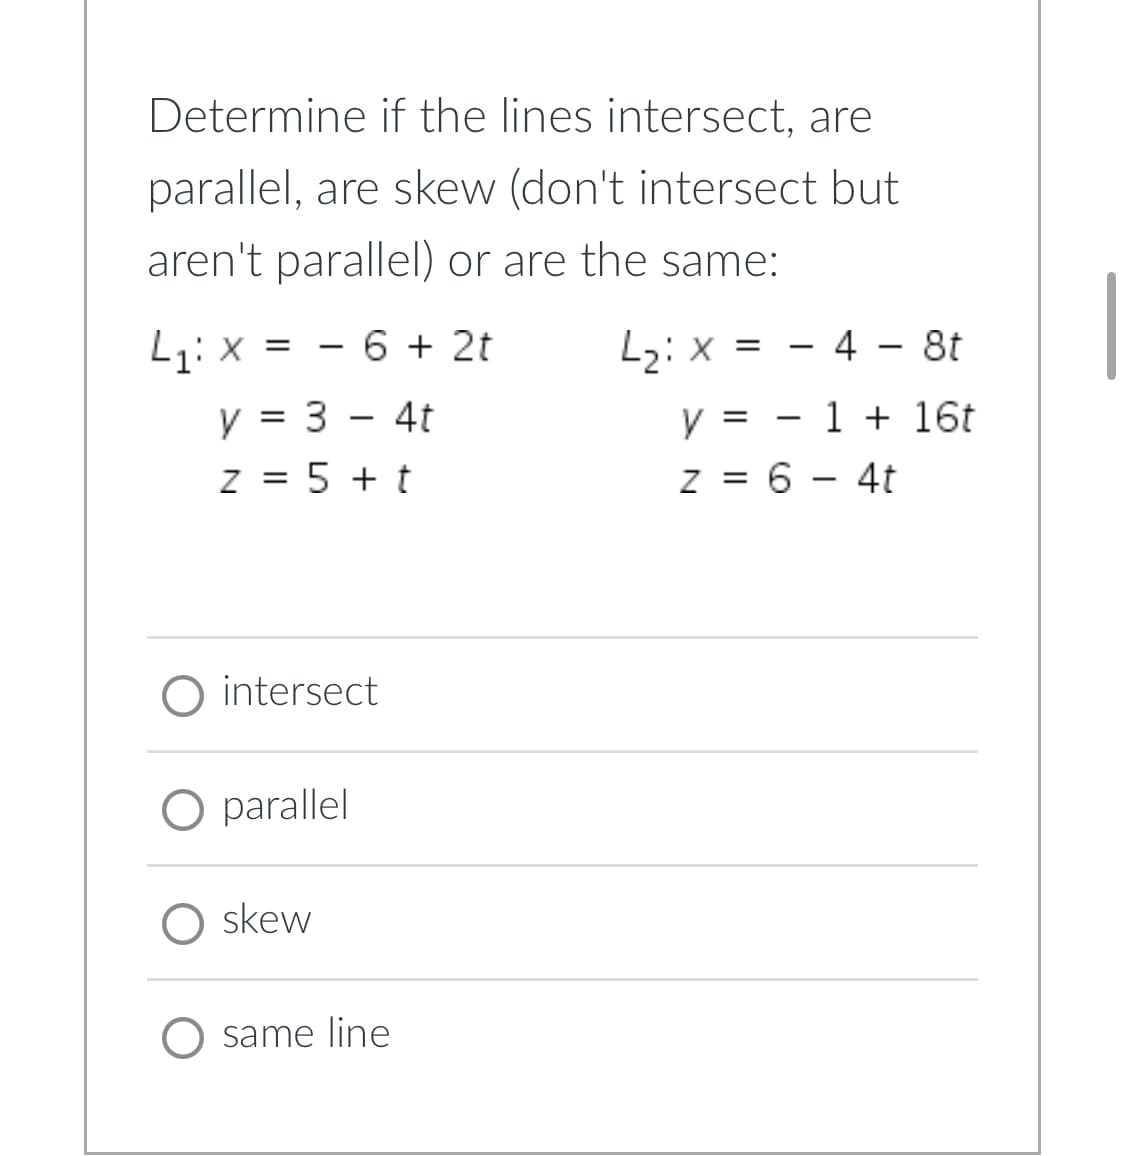 Determine if the lines intersect, are
parallel, are skew (don't intersect but
aren't parallel) or are the same:
L₁: x = 6 + 2t
L₂: x =
4 - 8t
y = 3 - 4t
y =
1 + 16t
z = 5 + t
z = 6 - 4t
O intersect
O parallel
skew
O same line